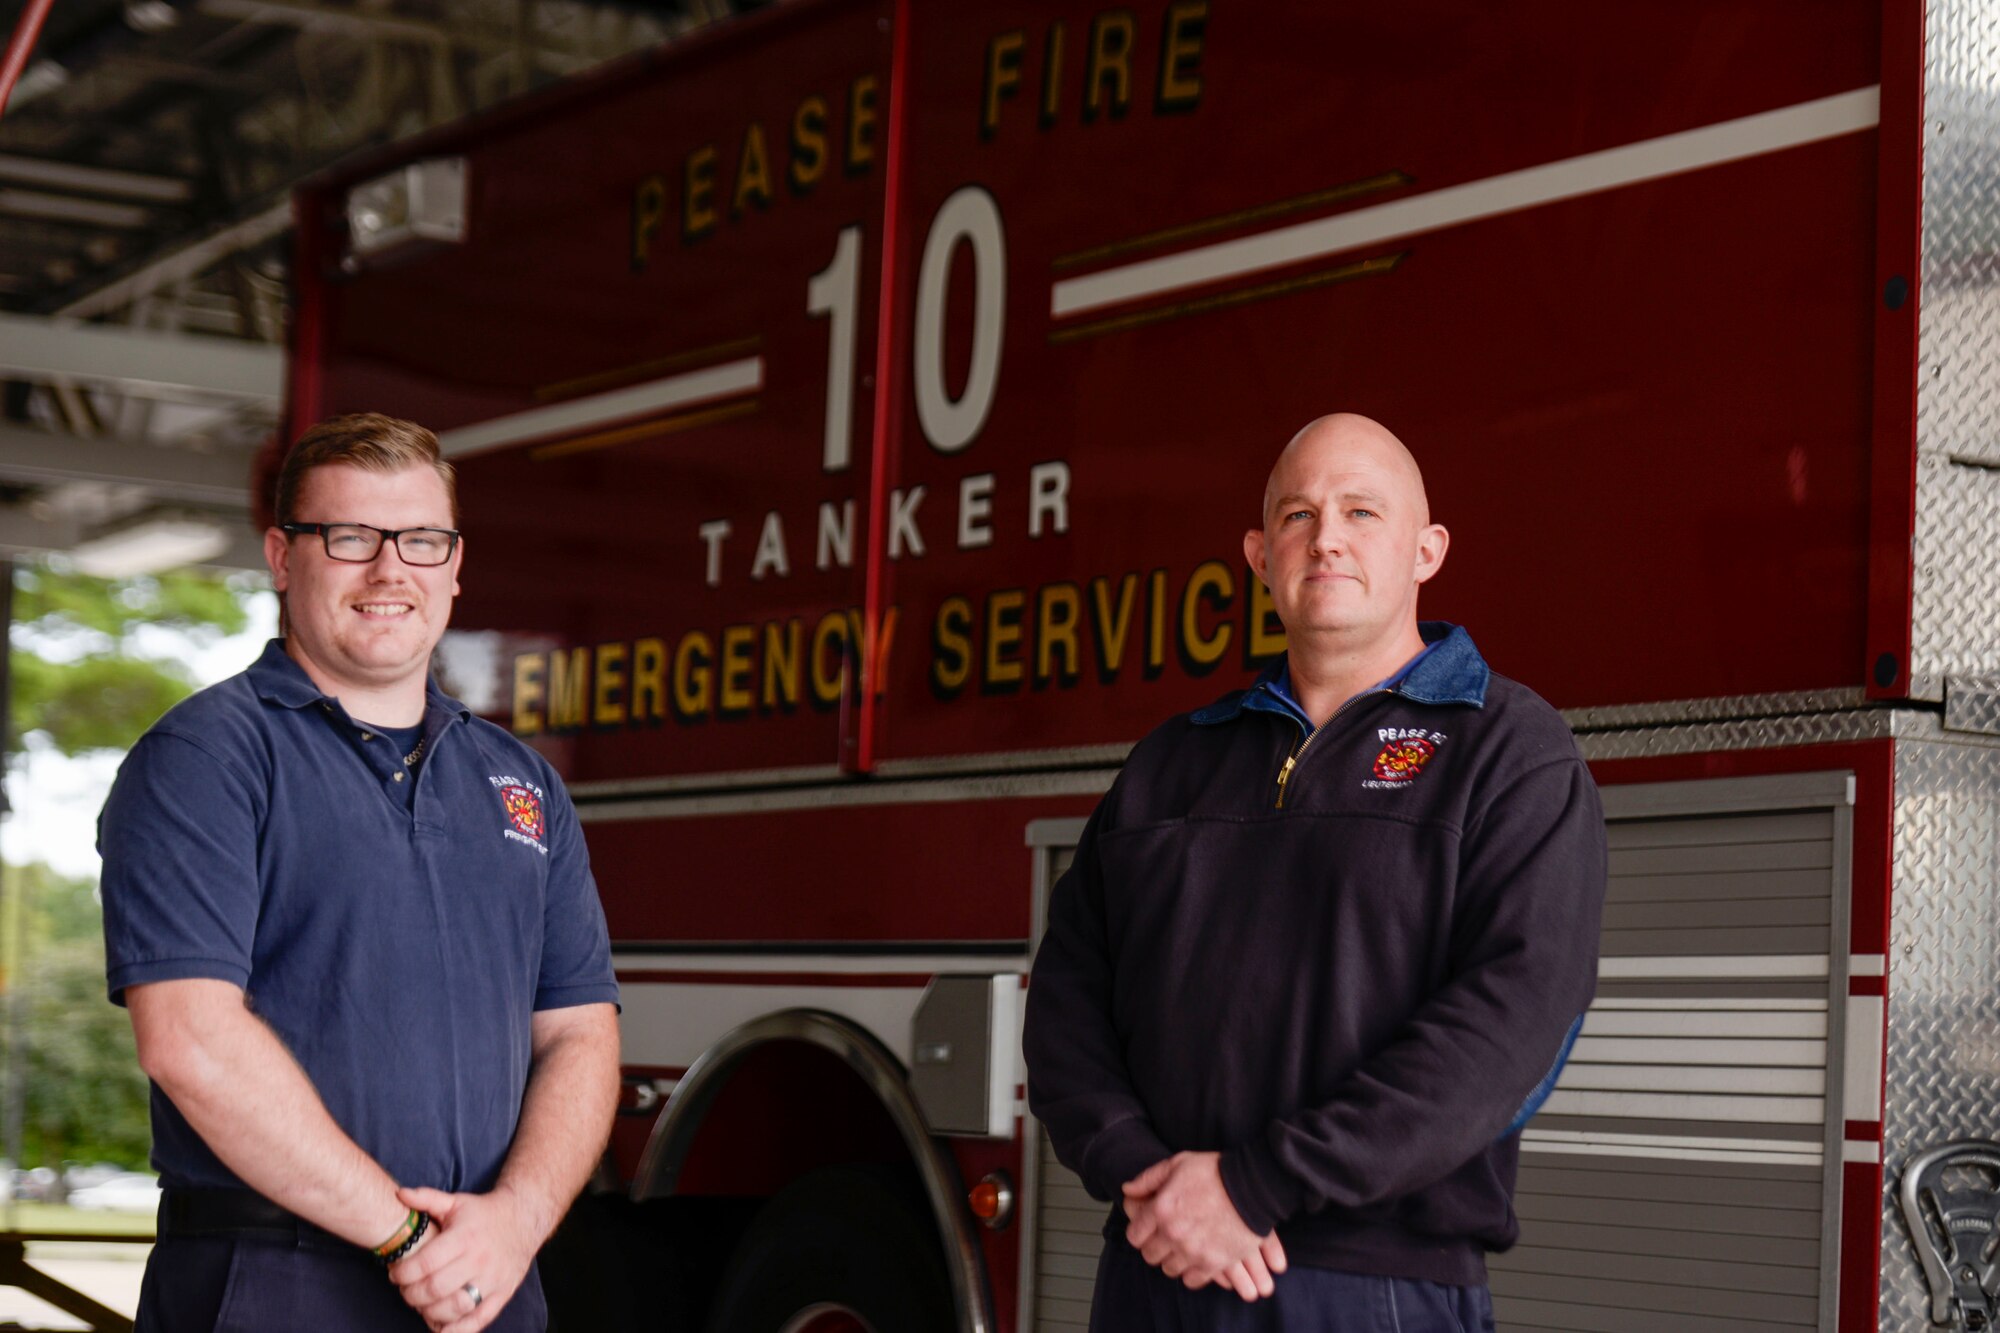 Thomas Gleason Jr. and Derek Murdock, firefighters with Pease Fire & Emergency Services pose for a portrait in front of a firetruck at Pease Air National Guard Base.